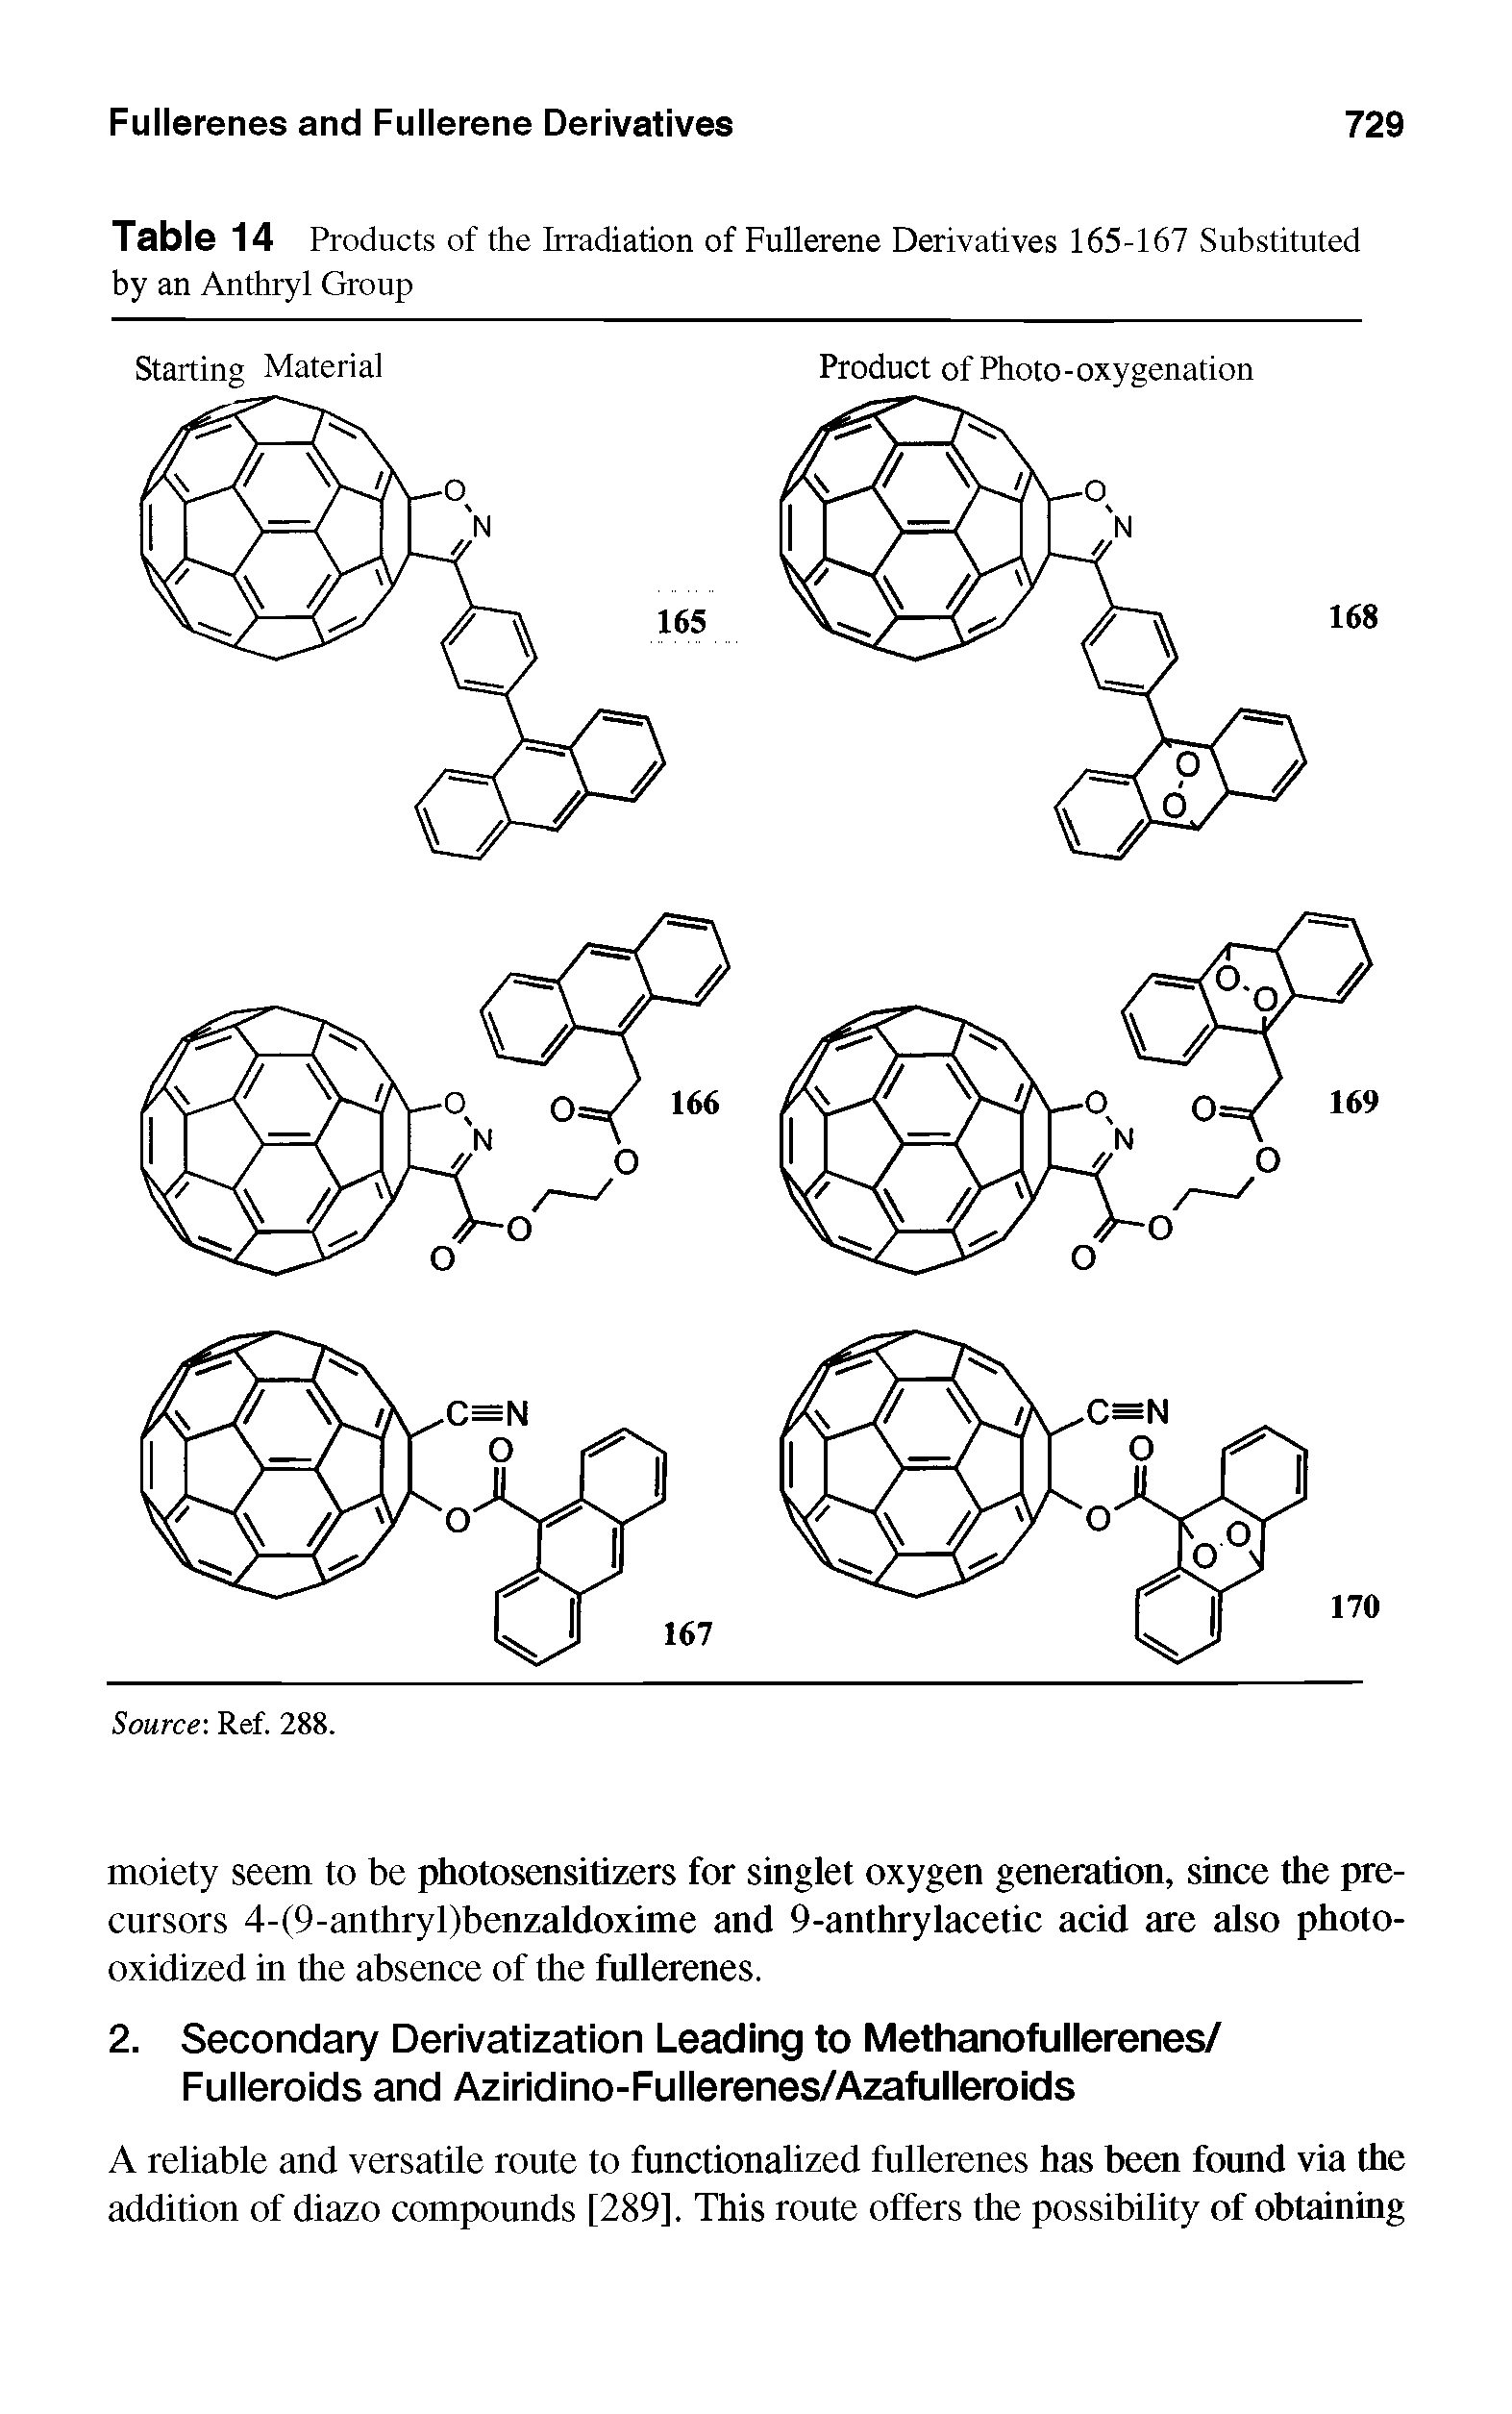 Table 14 Products of the Irradiation of Fullerene Derivatives 165-167 Substituted by an Anthryl Group...